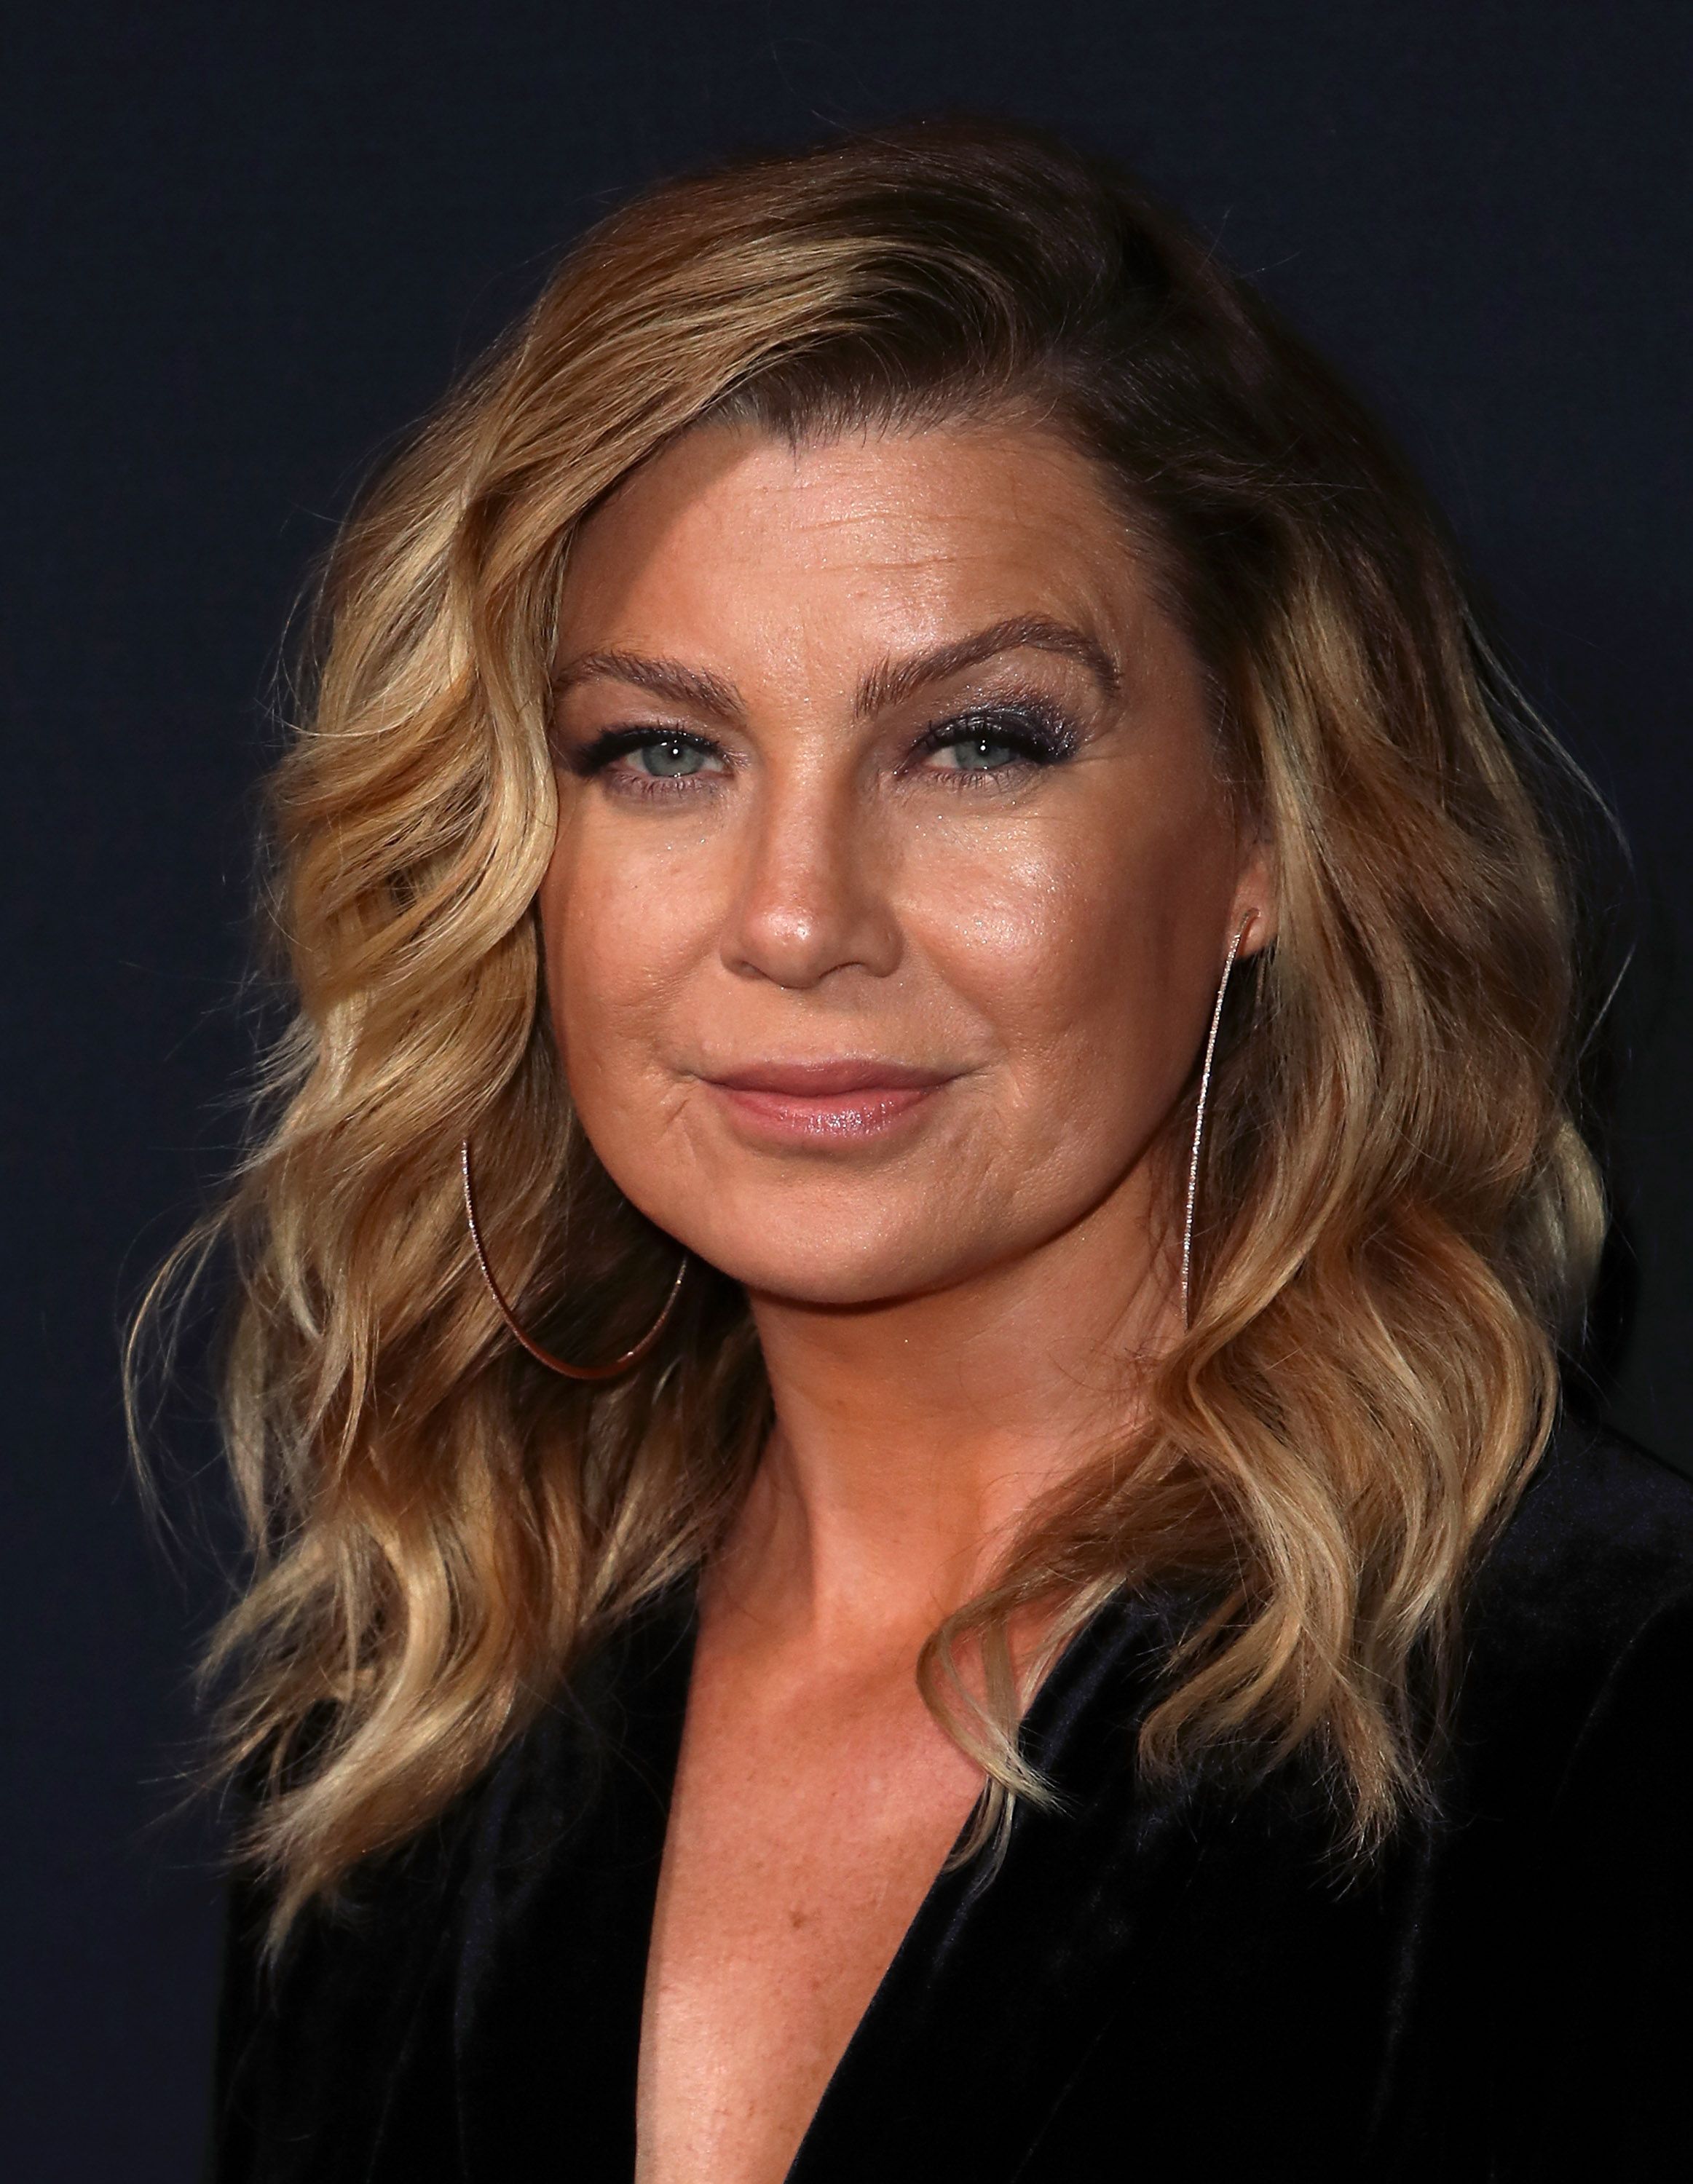 Actress Ellen Pompeo at the 300th episode celebration for ABC's "Grey's Anatomy" at TAO Hollywood on November 4, 2017 in Los Angeles, California | Photo: Getty Images